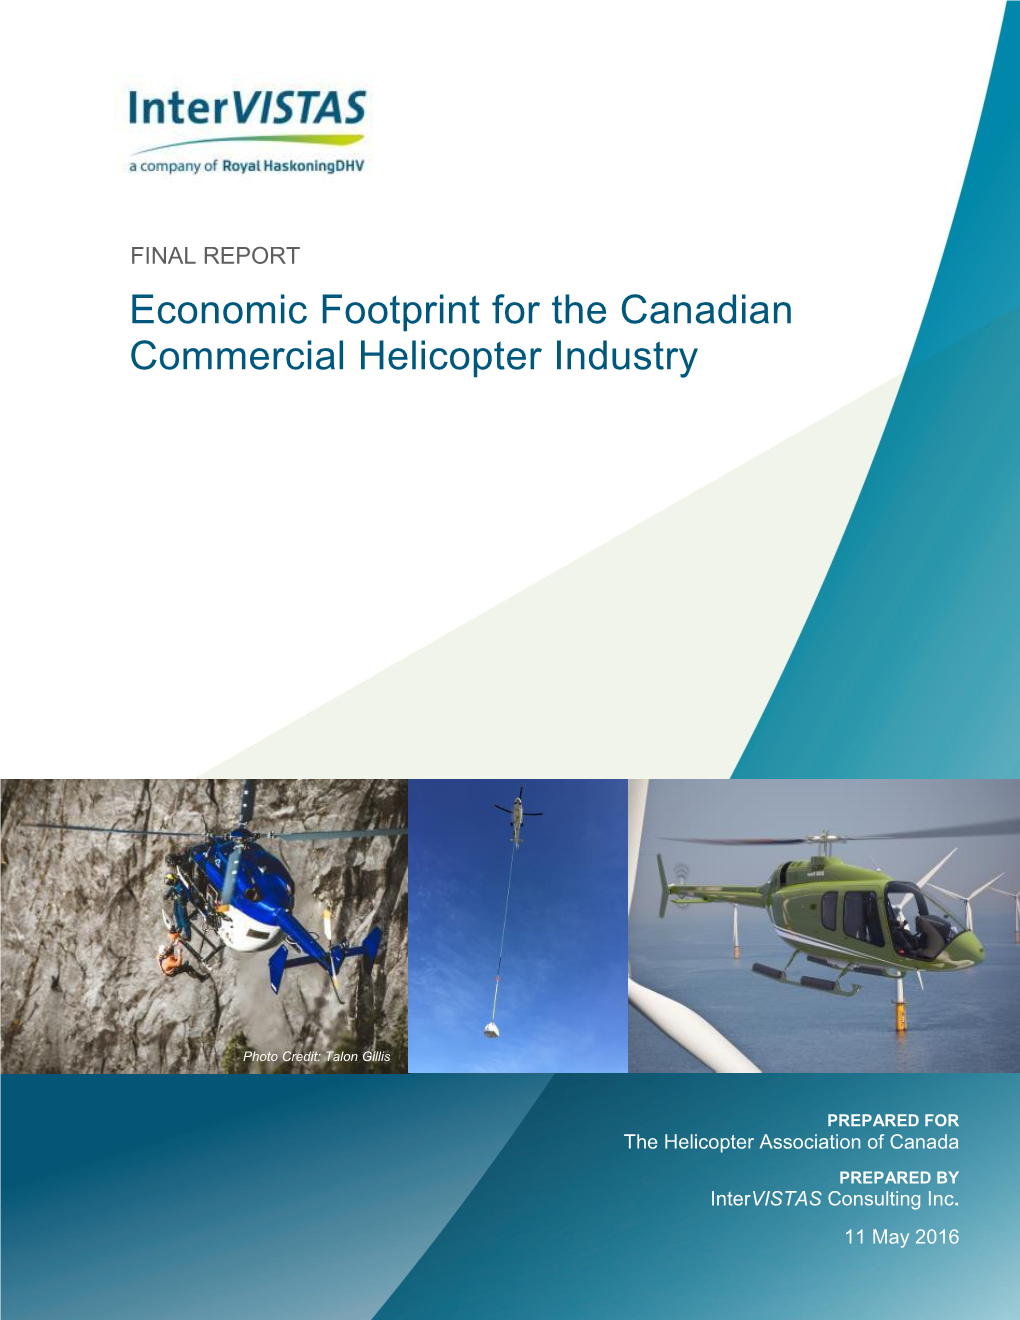 Economic Footprint for the Canadian Commercial Helicopter Industry